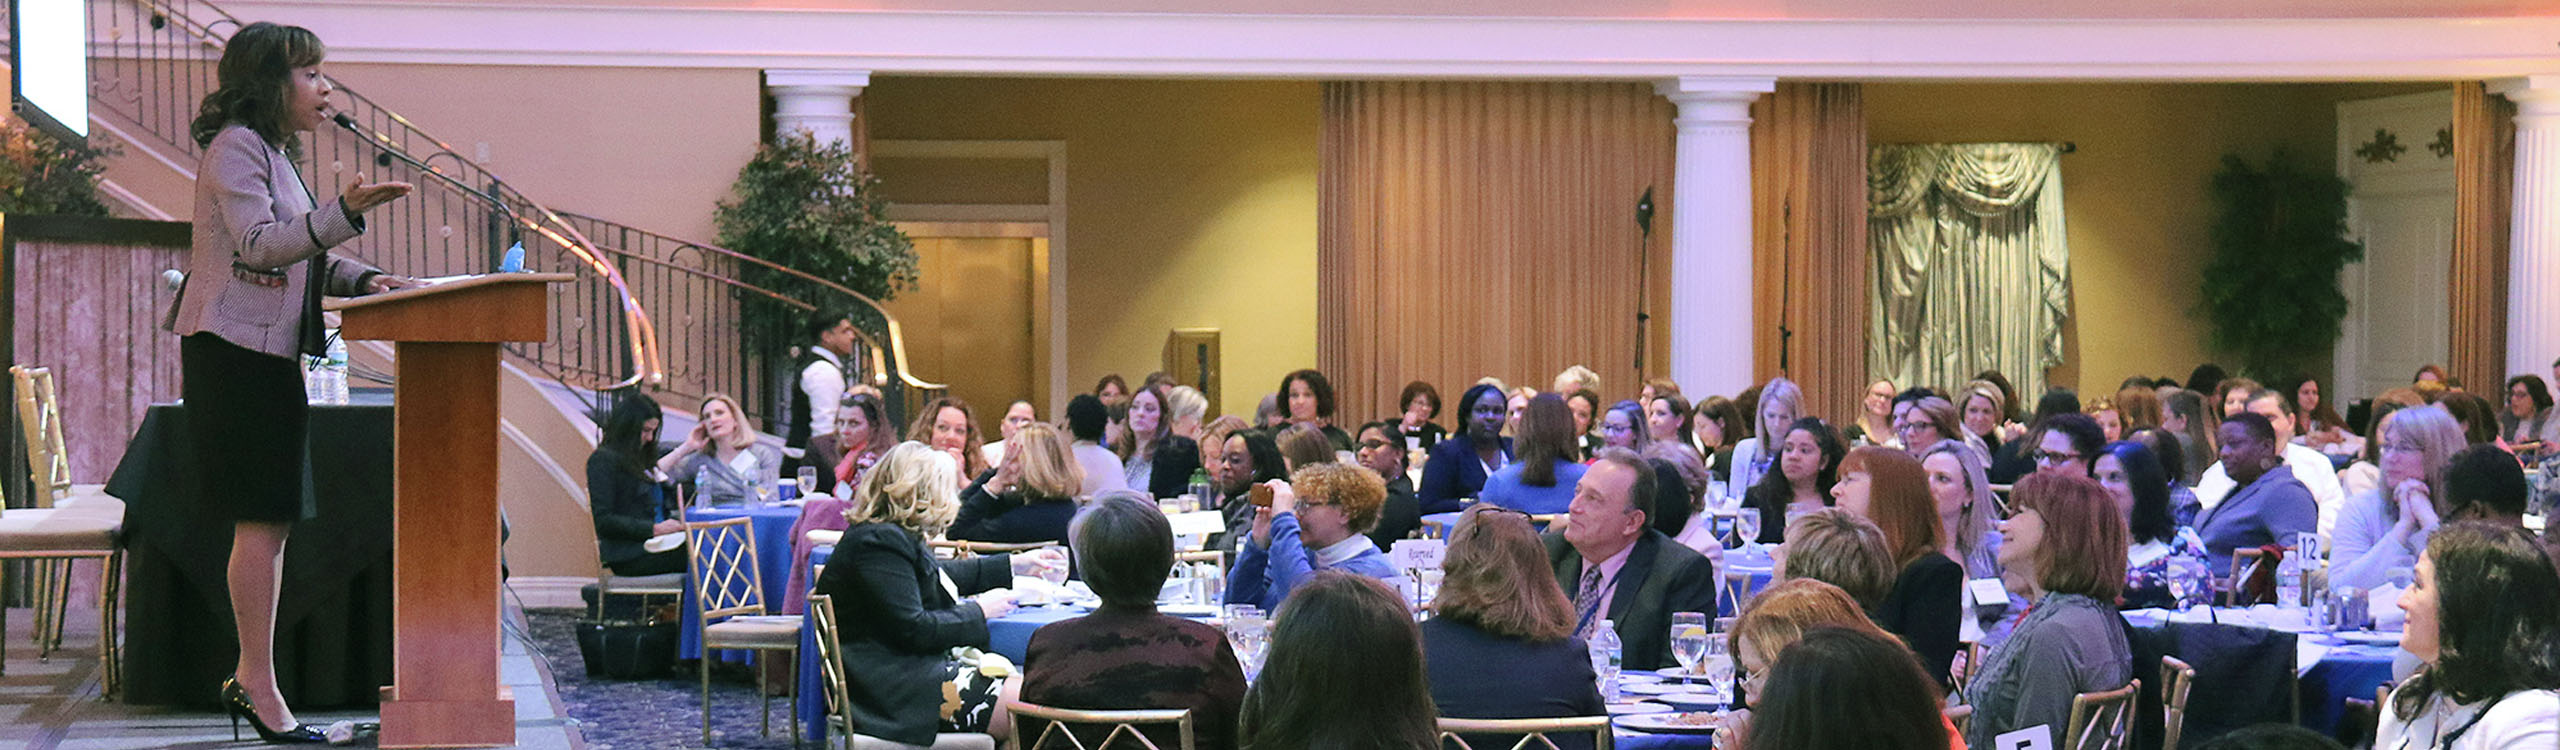 4th Annual New Jersey Association of School Administrators Women's Leadership Conference